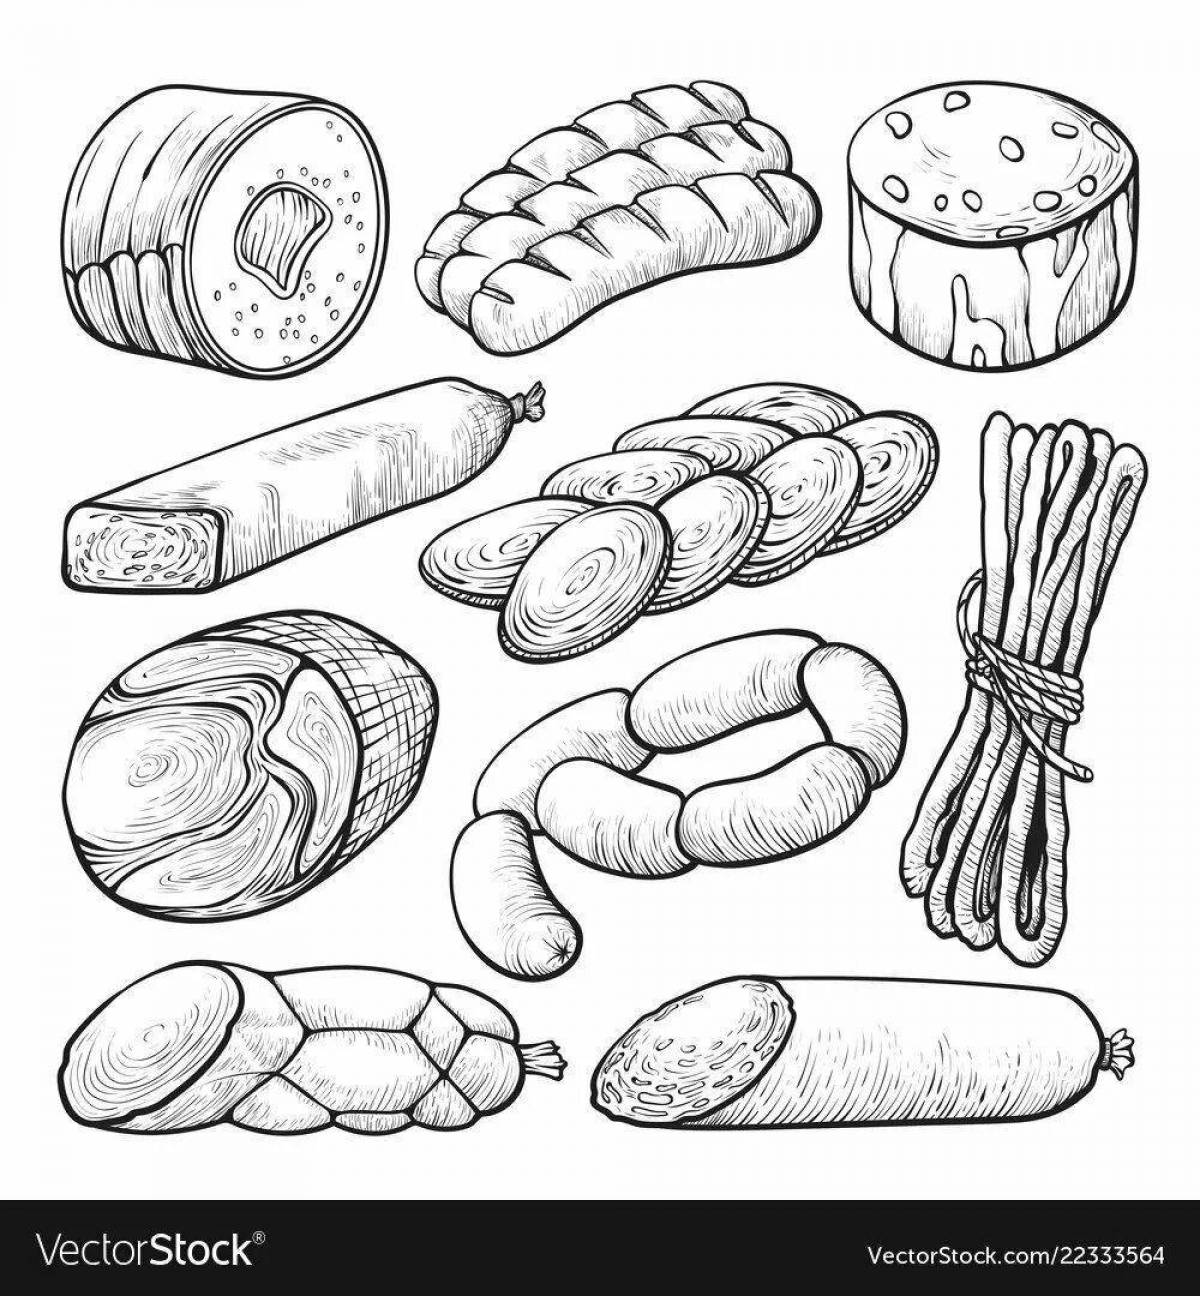 Adorable sausage coloring book for kids